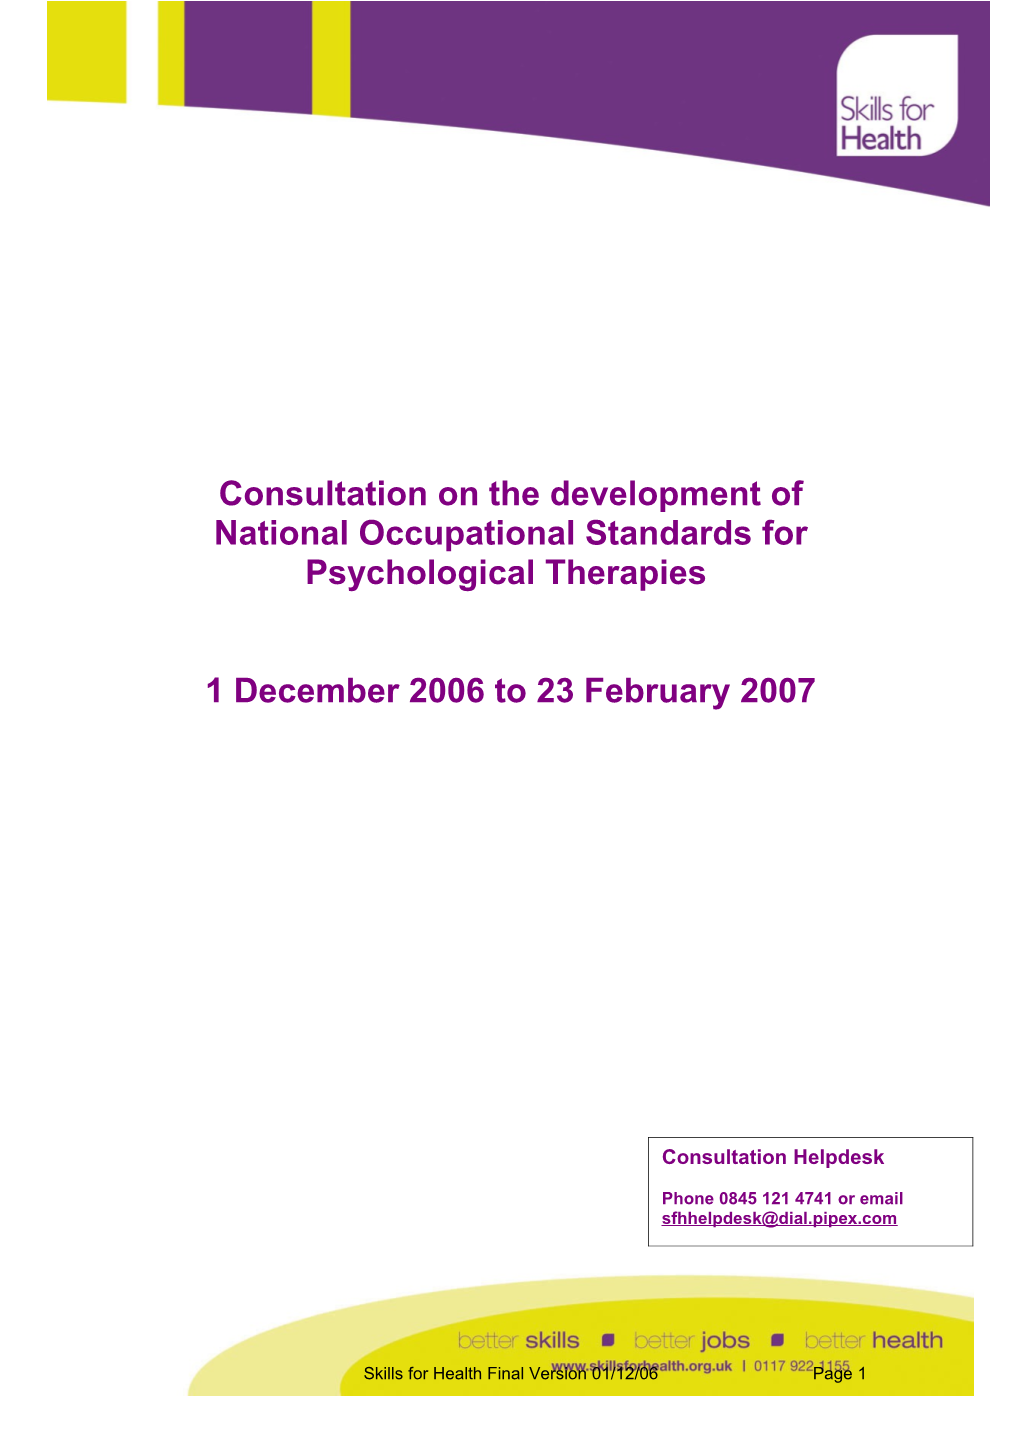 Consultation on the Development of National Occupational Standards for Psychological Therapies